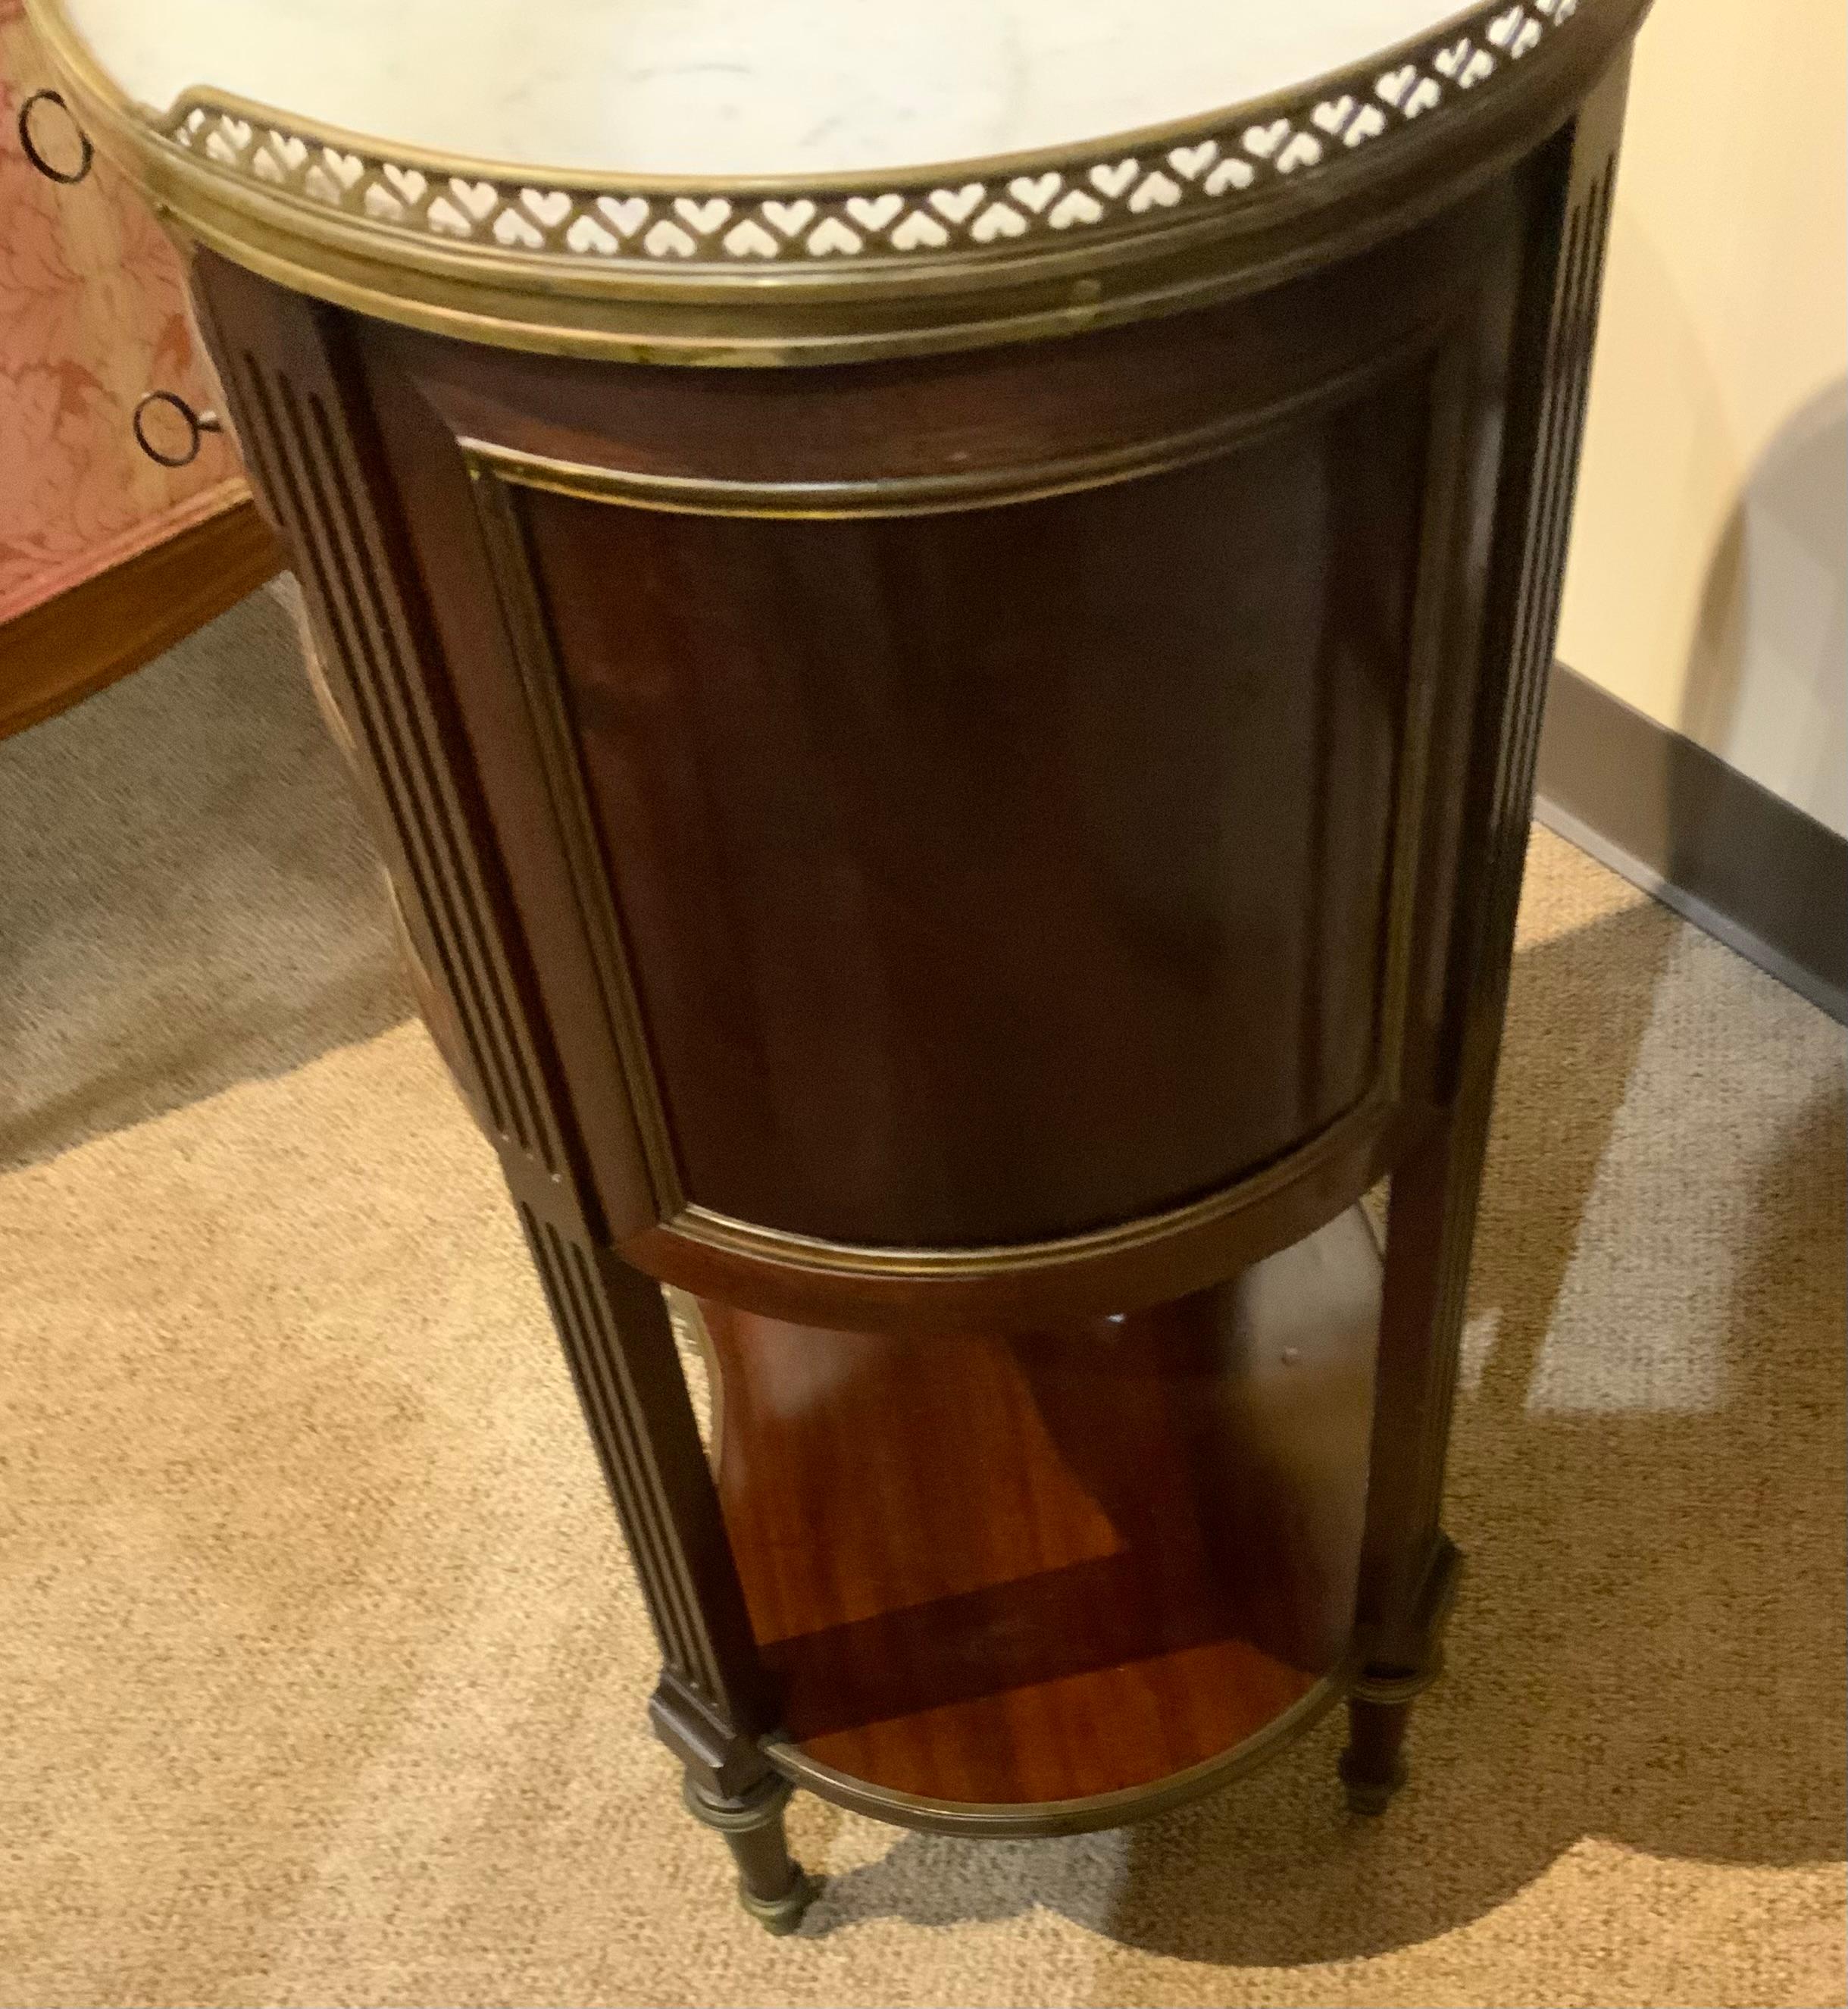 Oval shaping with a pristine white marble top makes this
Piece desirable. It is made of solid mahogany with fine
Detailing. It has original locks and keys. It has one drawer
And a door that opens and also locks. It has a tapered
Straight leg.